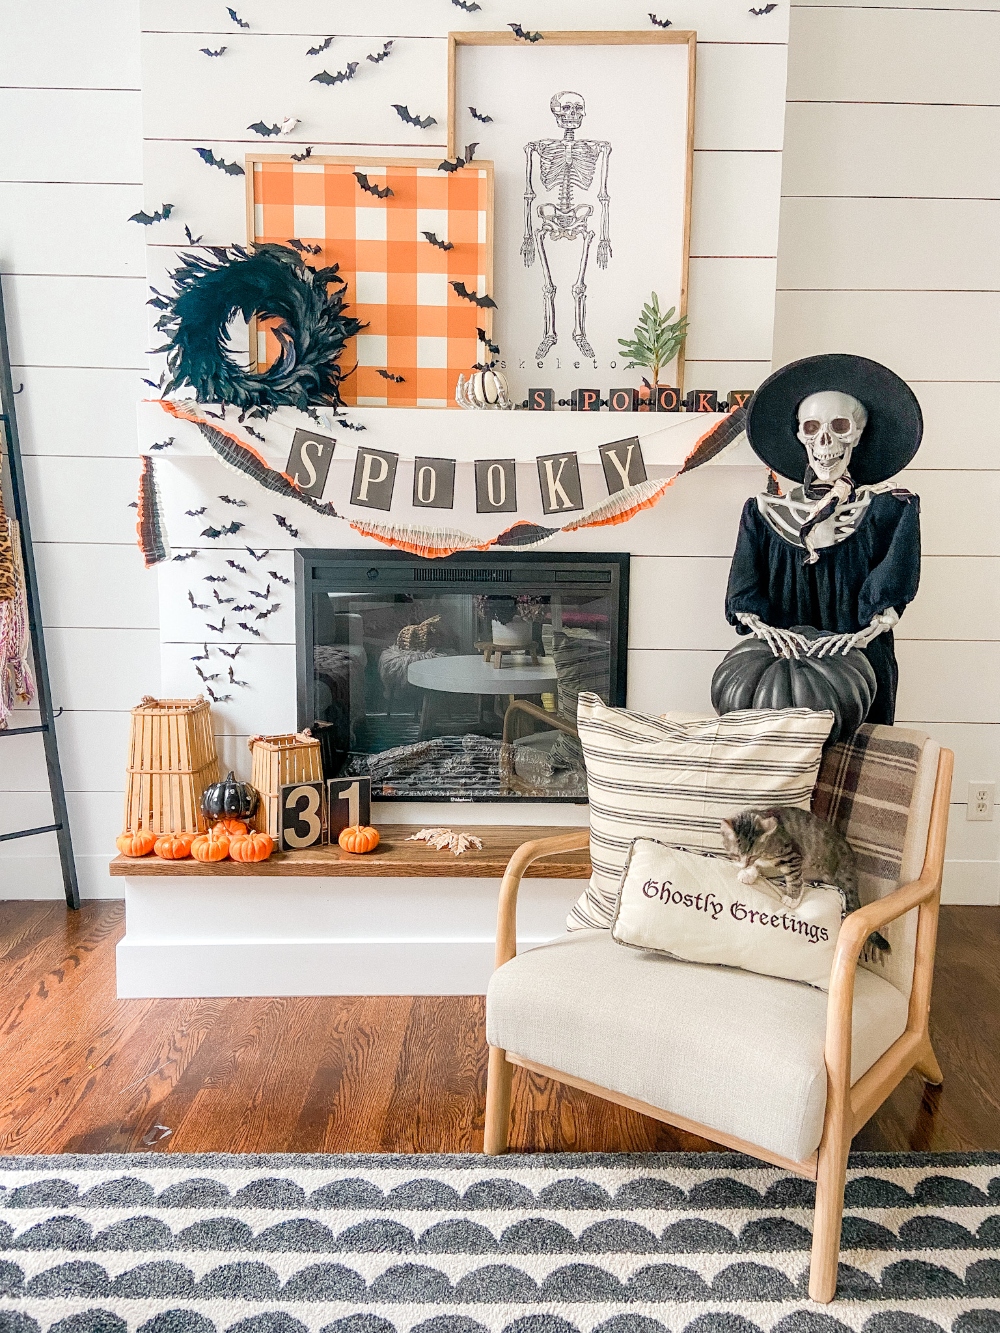 Spooky Halloween Decor and Mantel. Add some spooky charm to your home with these easy Halloween ideas!